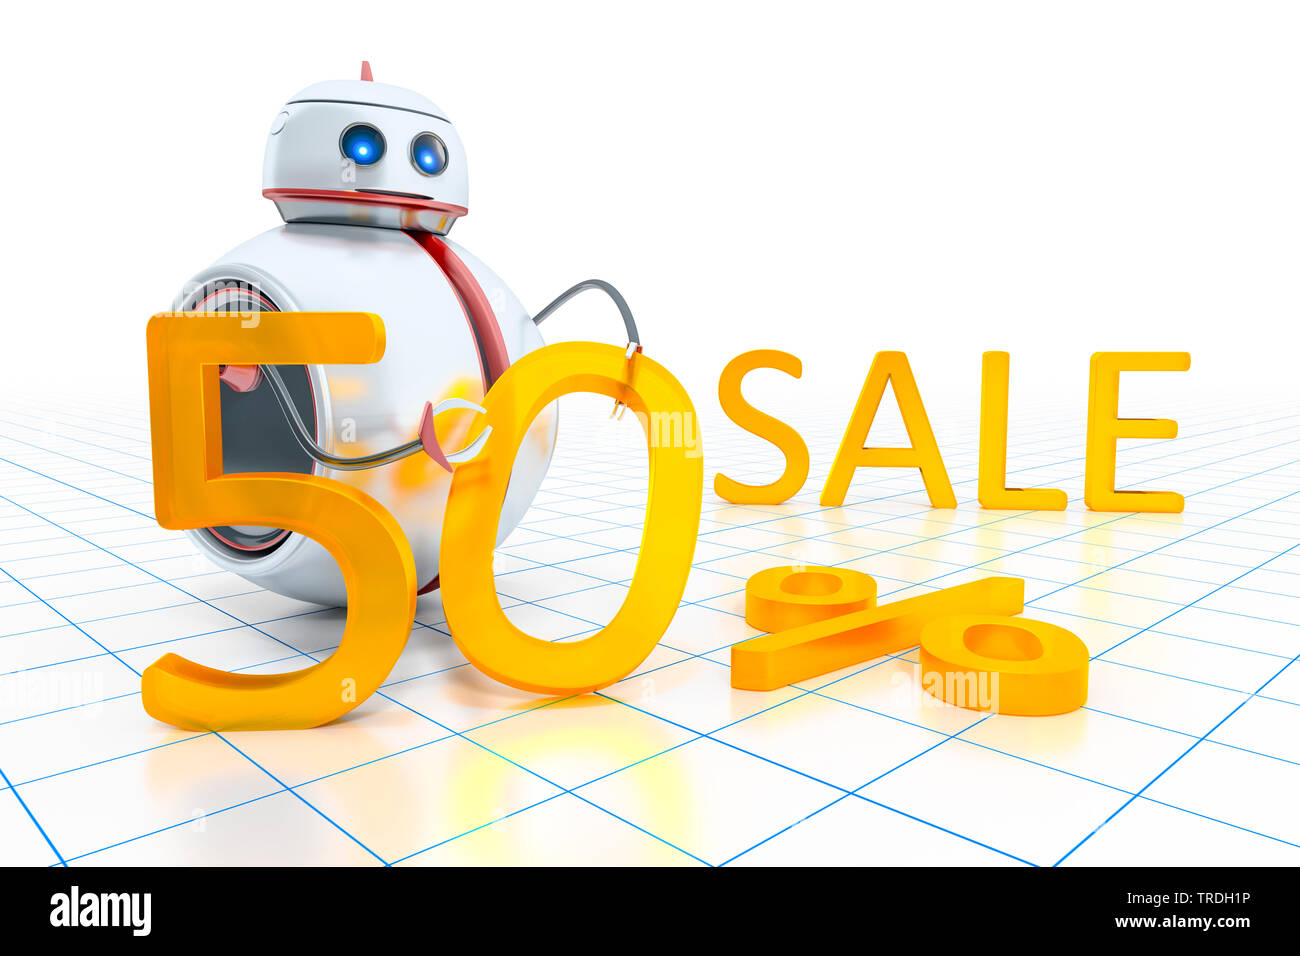 3D computer graphic, round cute robot in white color standing behind lettering 50% SALE Stock Photo